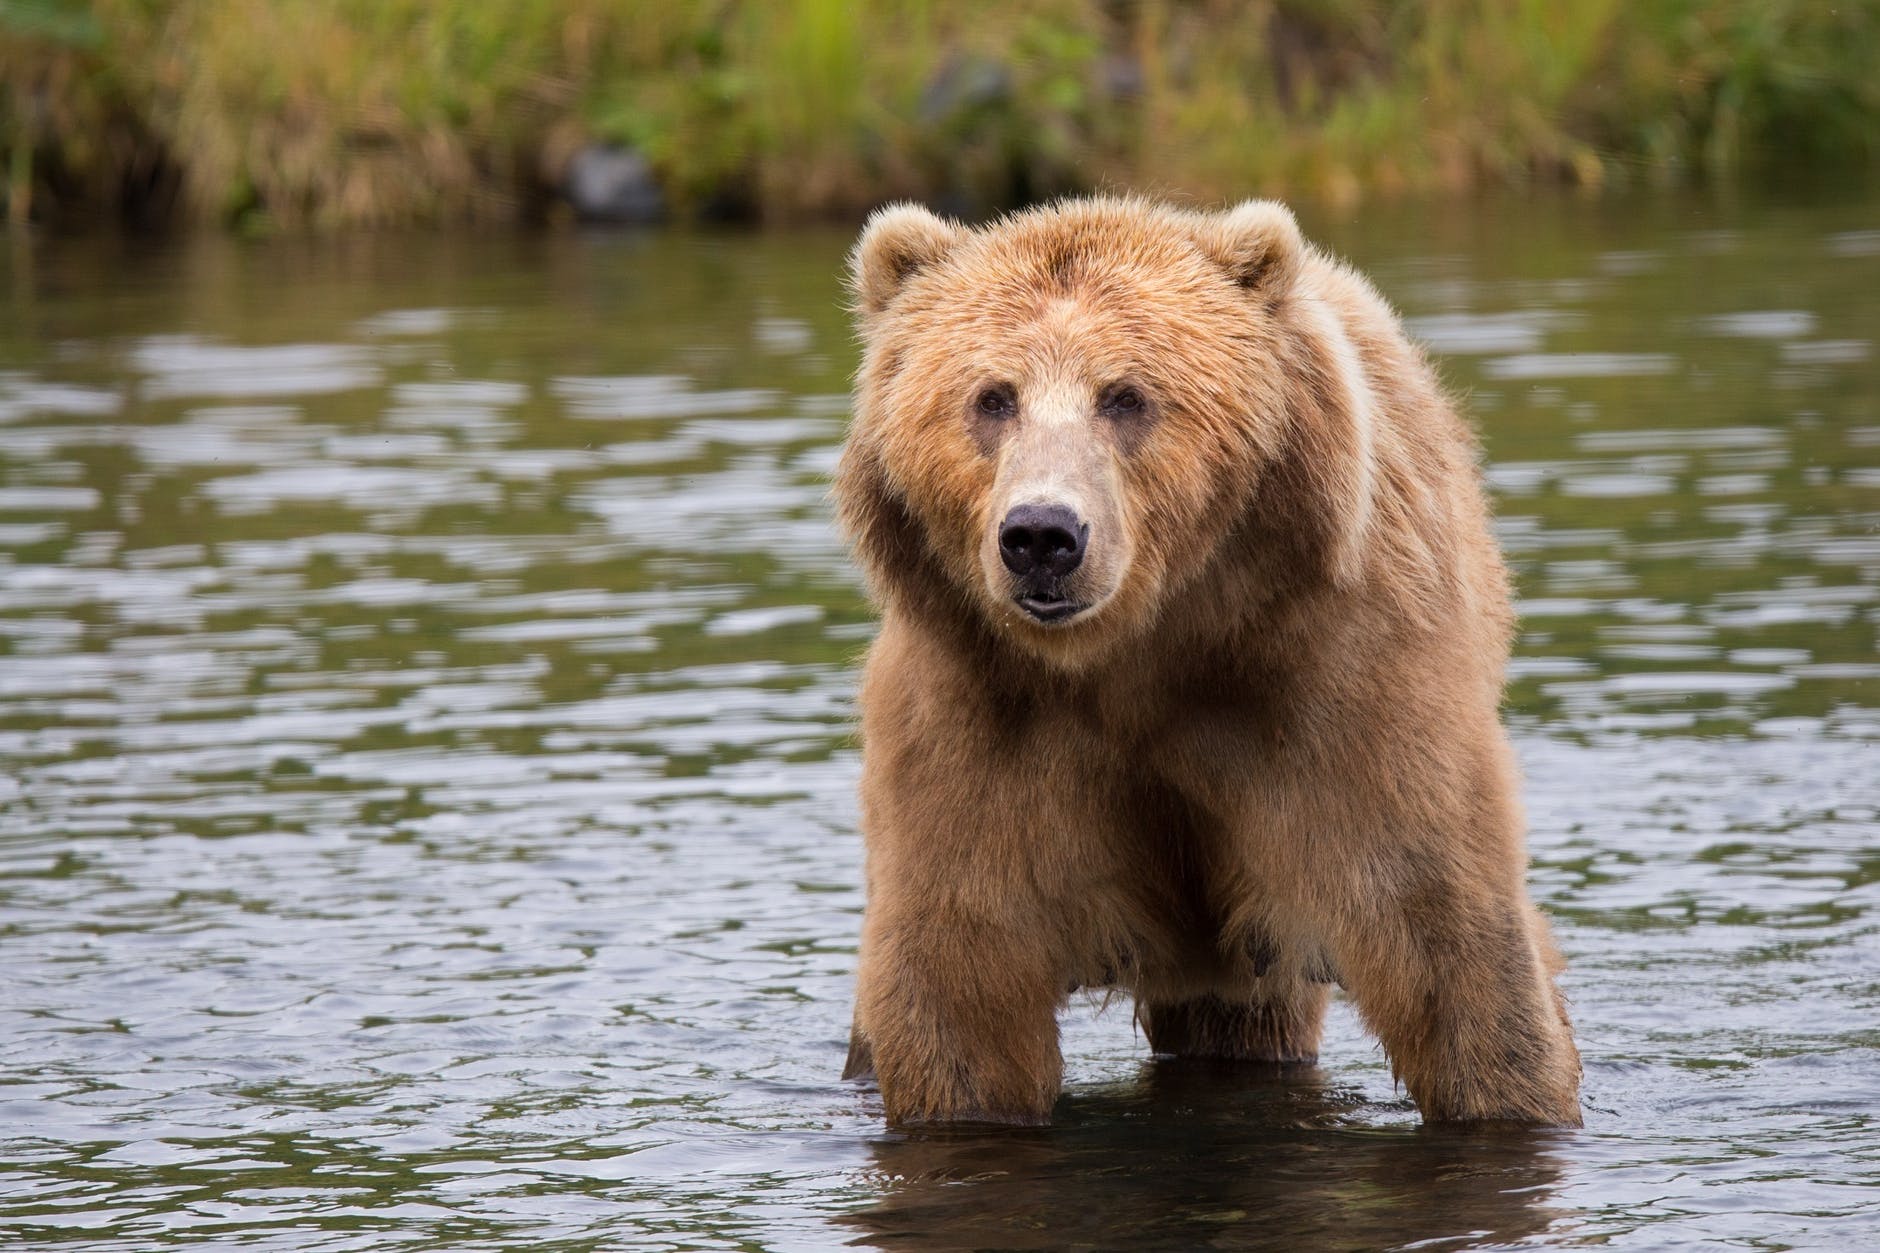 an adult bear standing in water